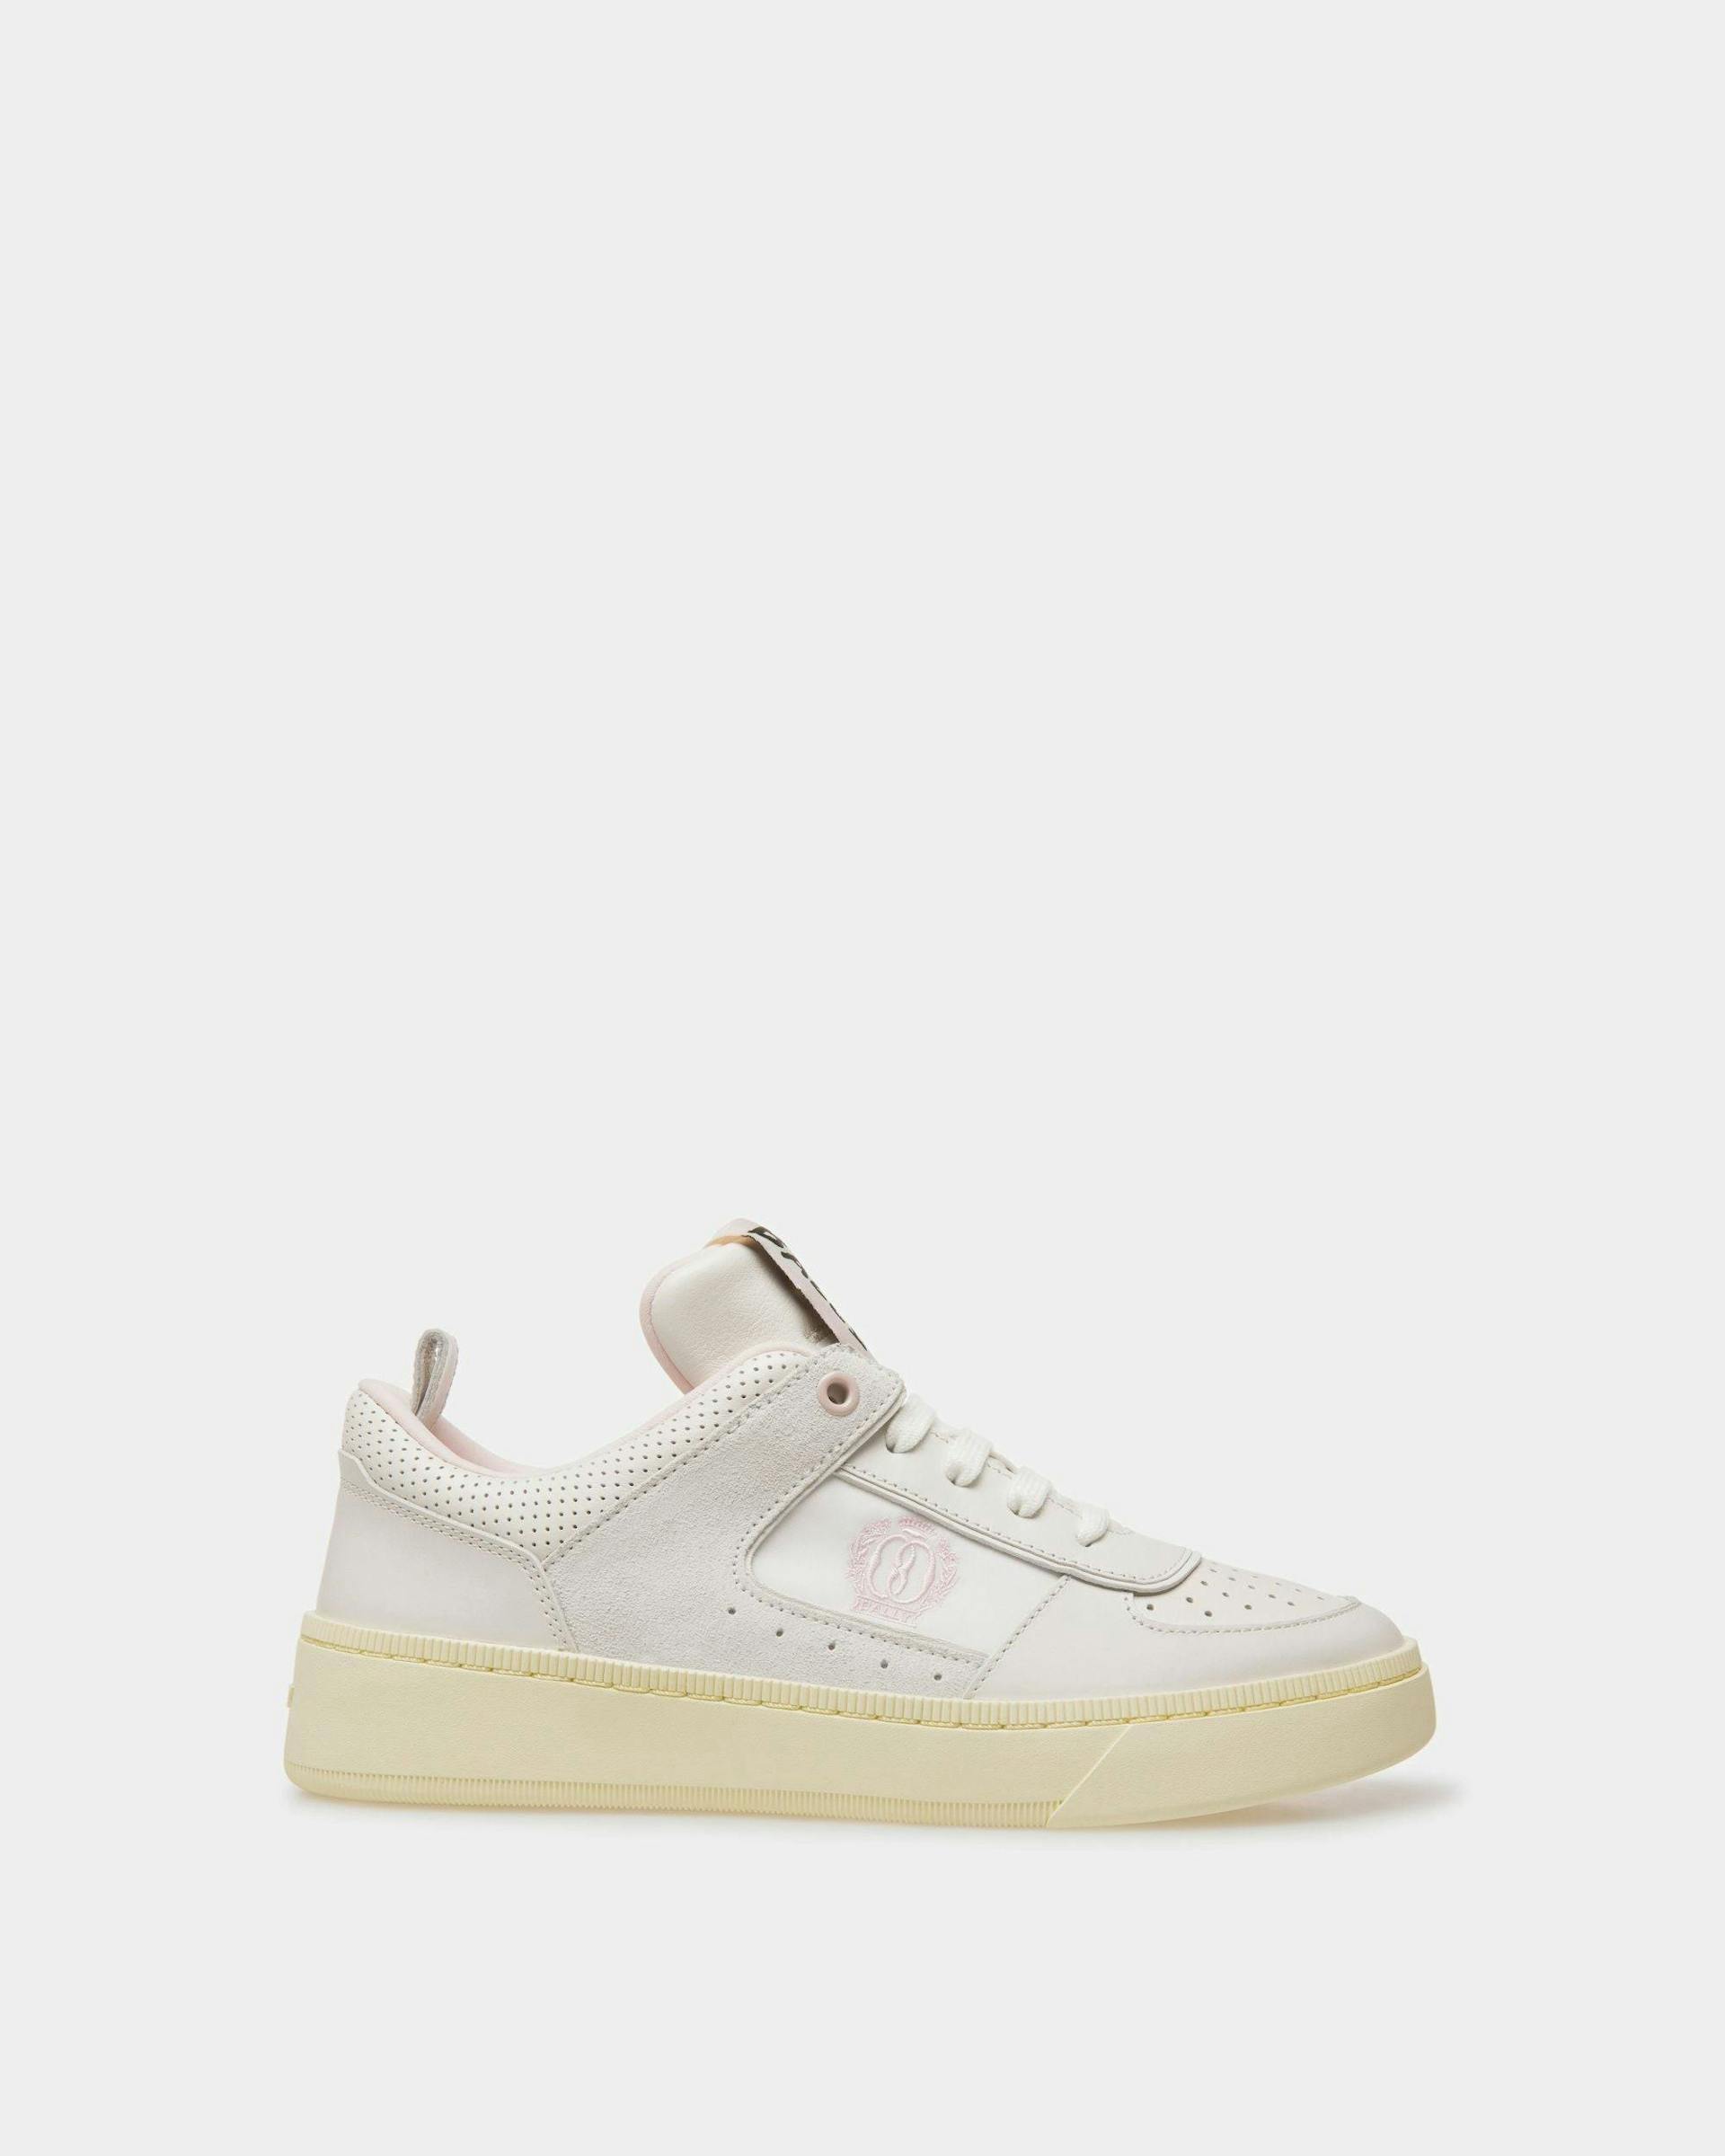 Raise Sneakers In White And Pink Leather - Women's - Bally - 01